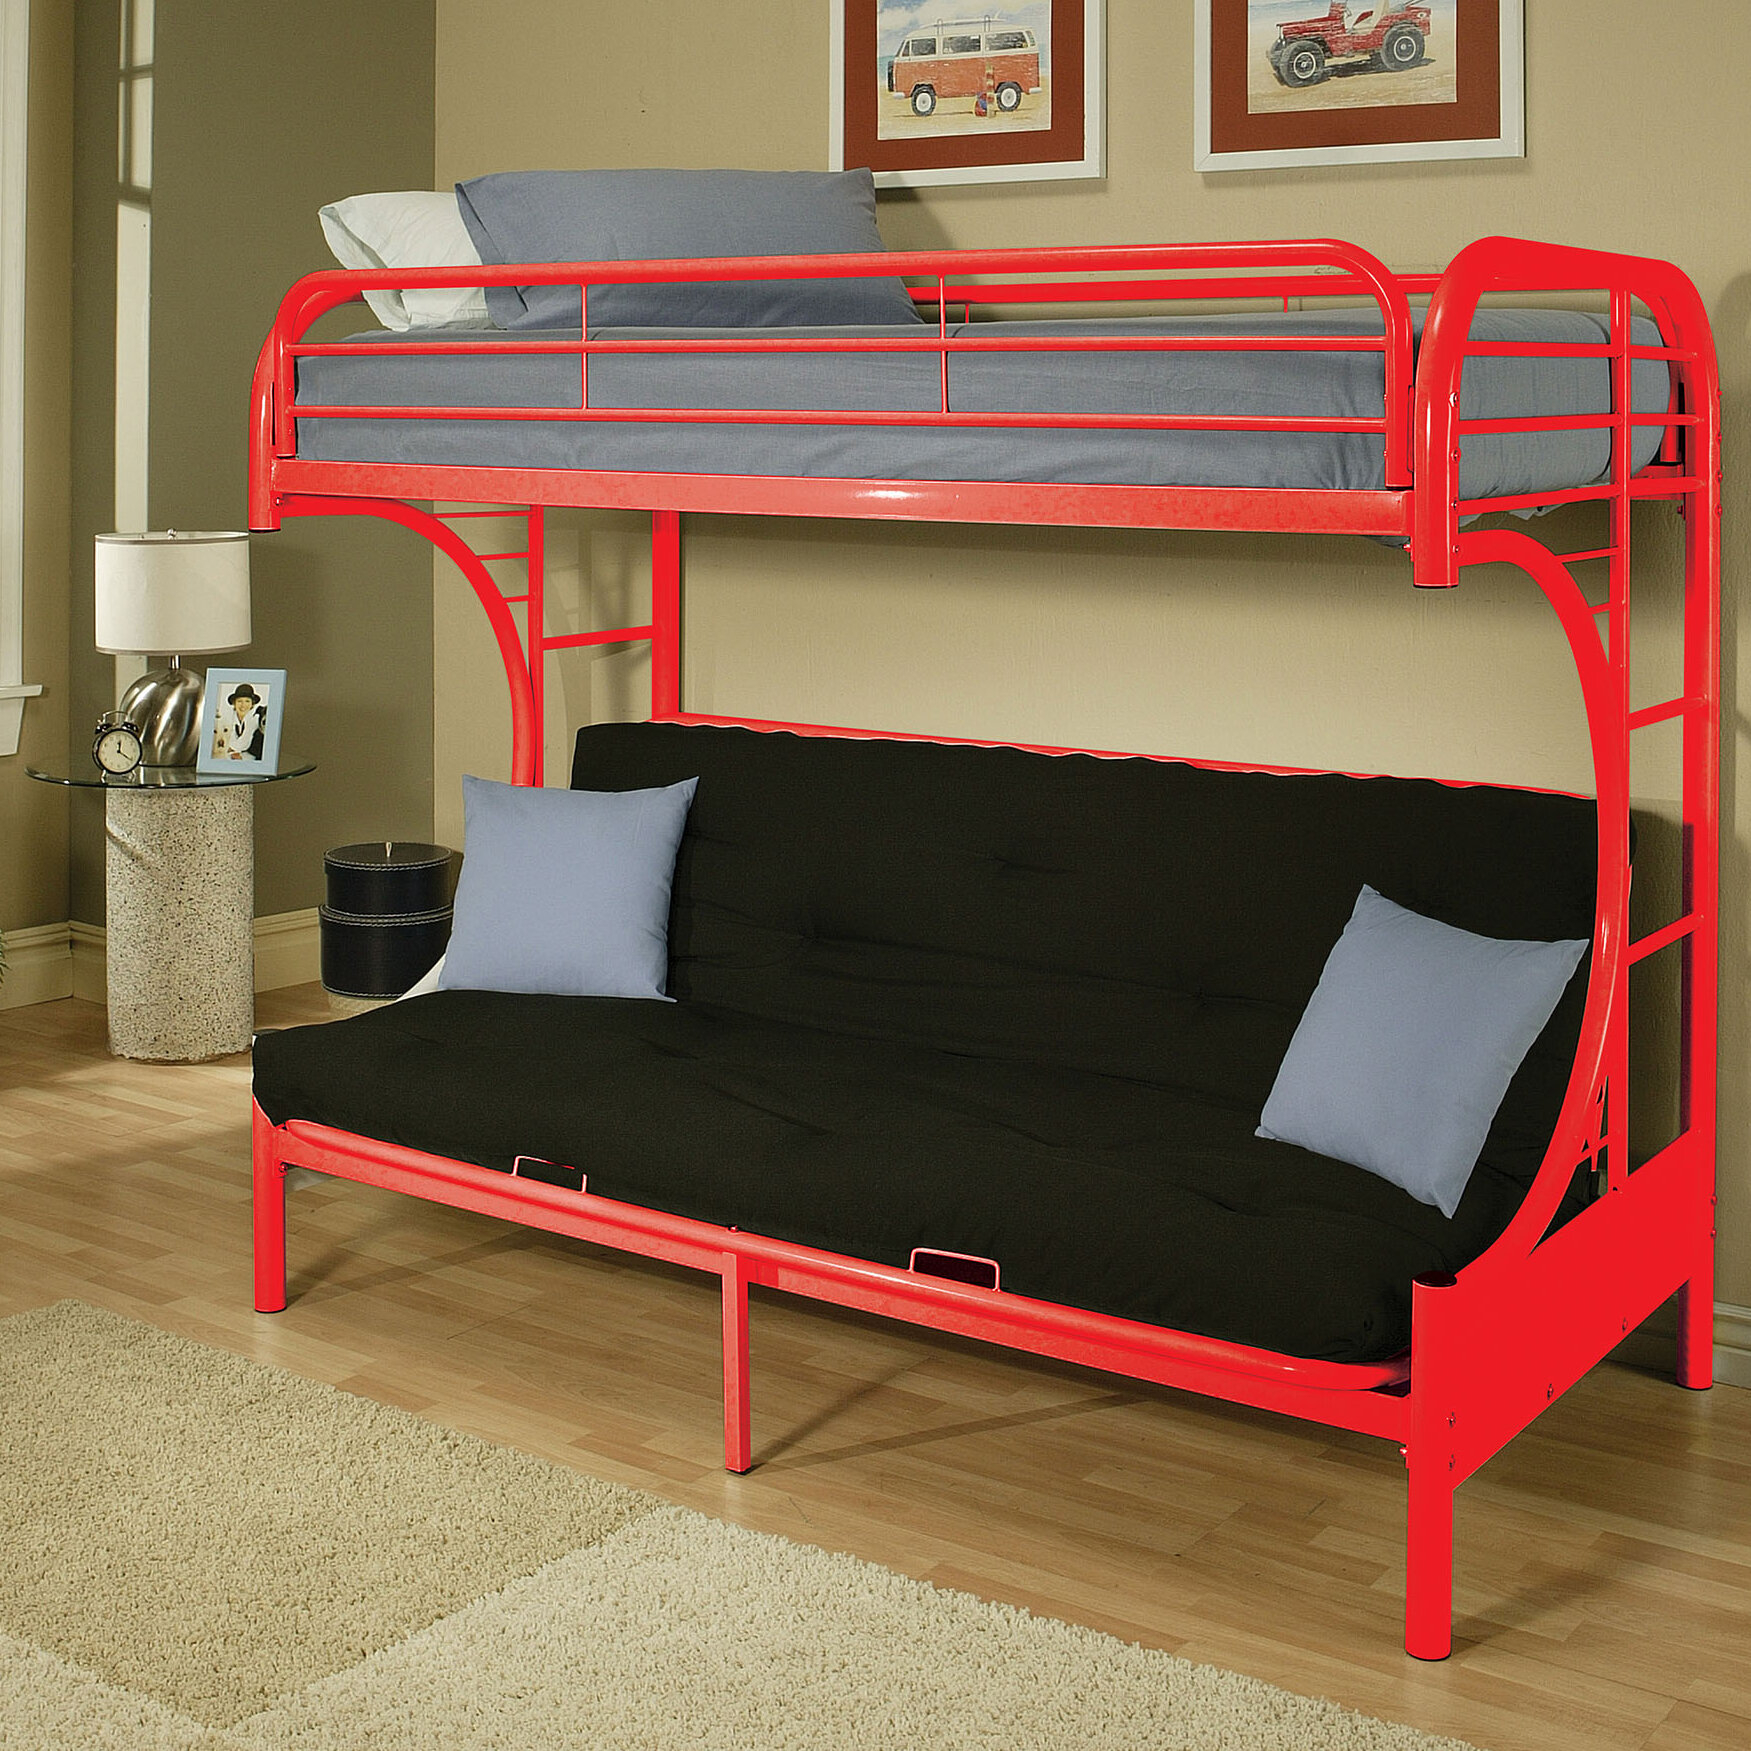 Full Over Futon Bunk Bed Visualhunt, Kids Bunk Bed With Sofa